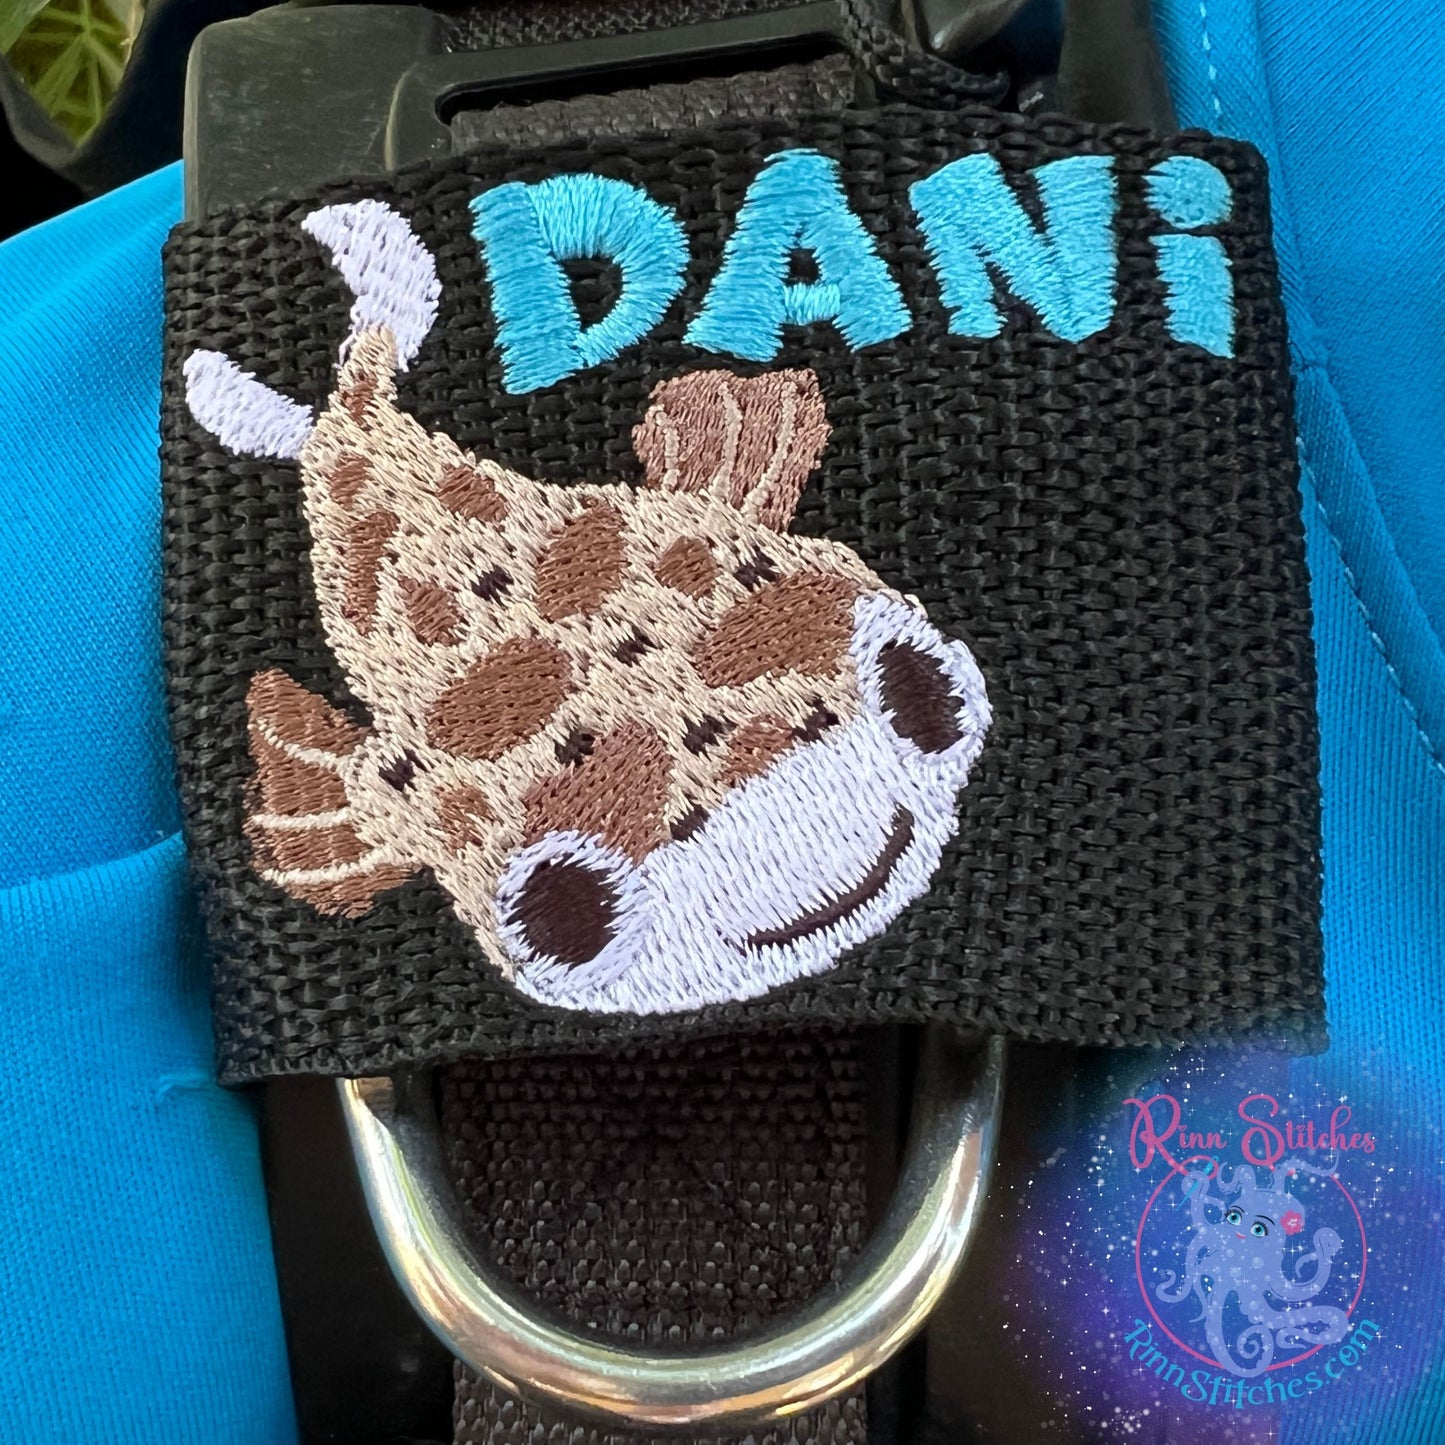 Puffer Fish Personalized & Customizable Scuba Diver BCD Identification Tag | Scuba Diver Gift | Made on Maui | Pufferfish Porcupinefish By Rinn Stitches on Maui, Hawaii - Small BCD Jacket Size - Scuba Pro Hyrdros - Zeagle Zena